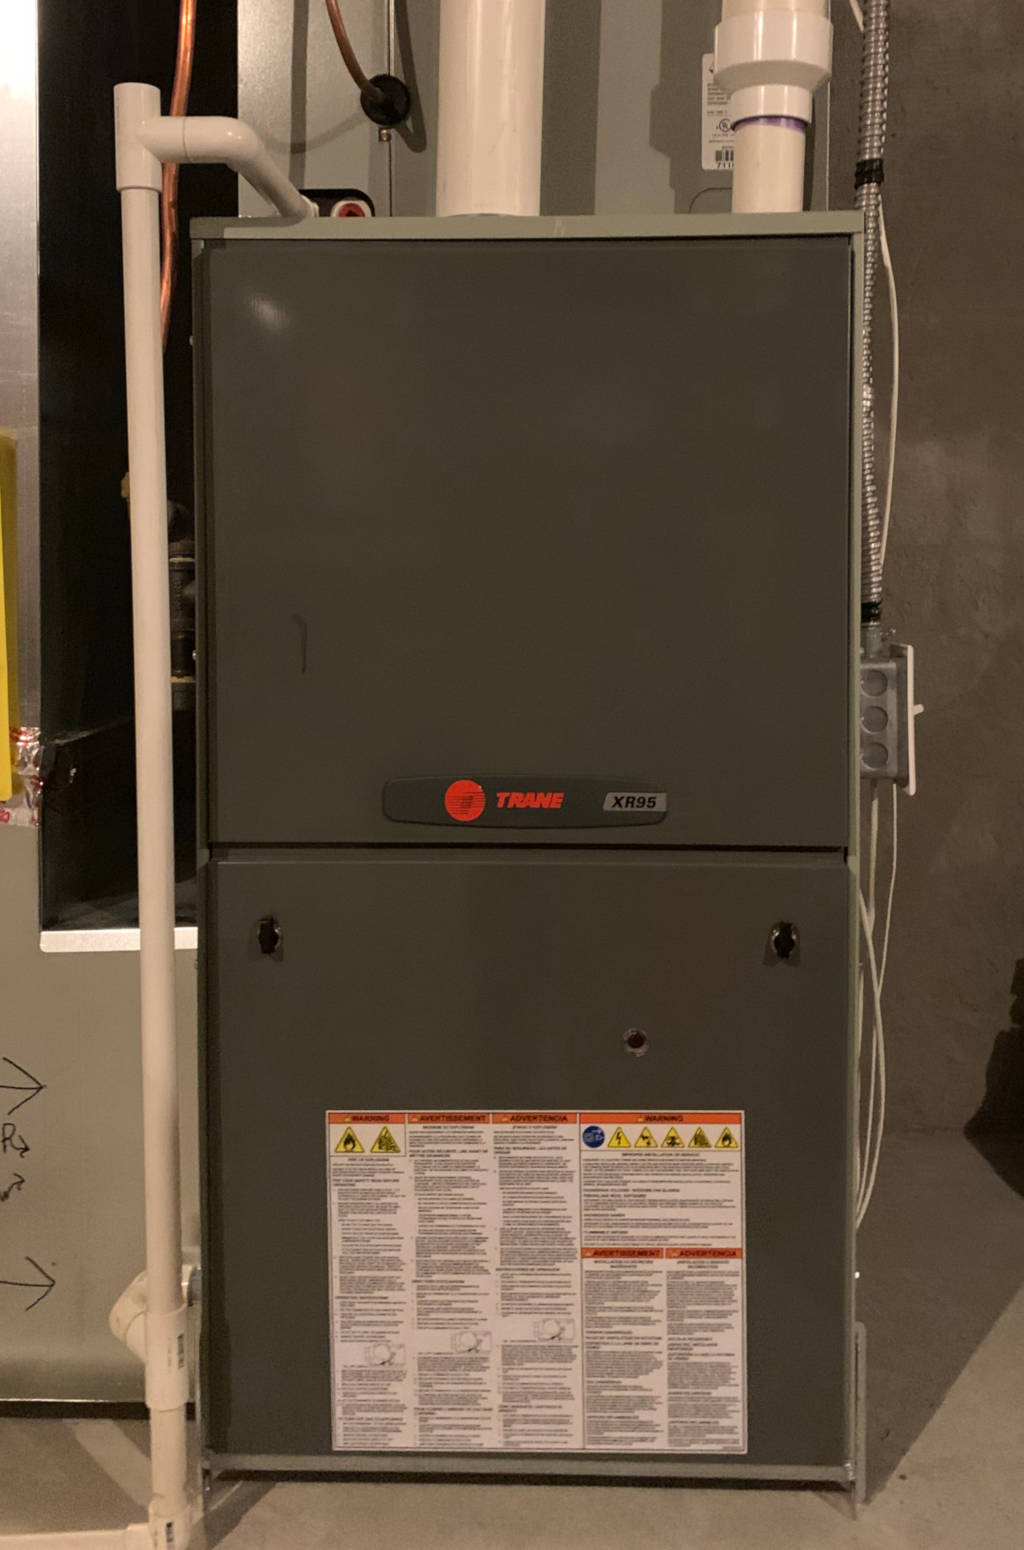 Furnace in a residential home